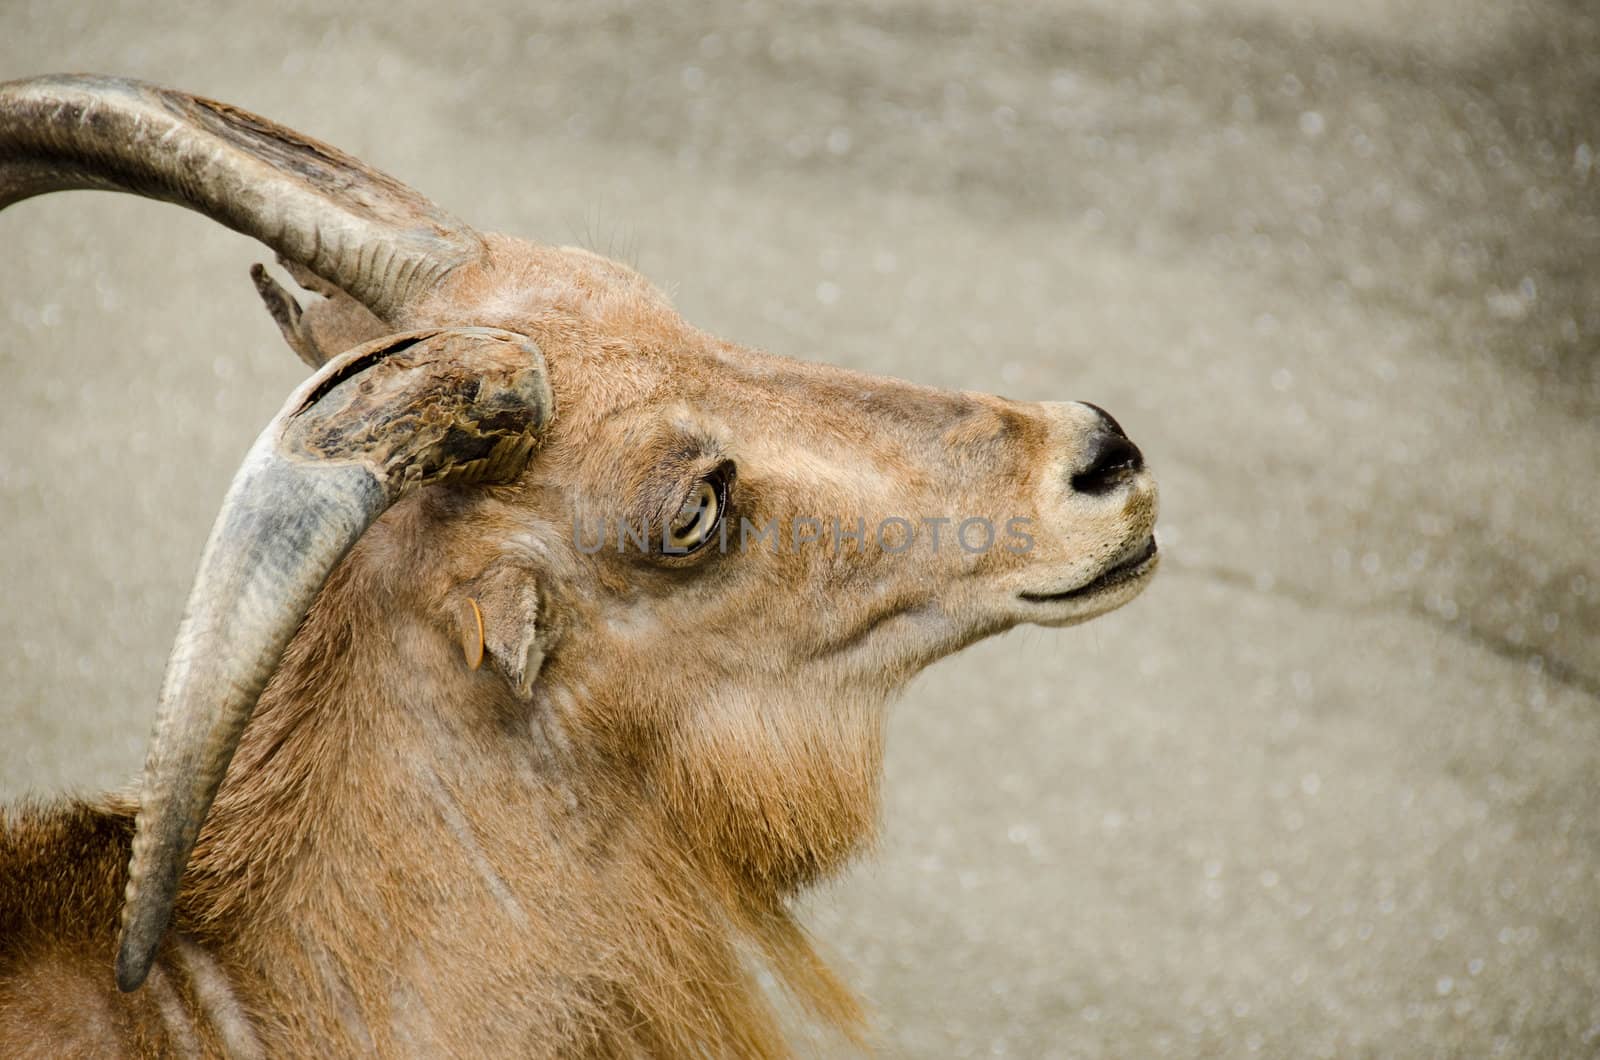 Head of a Alpine ibex, a species of wild goat that lives in the mountains of the European Alps